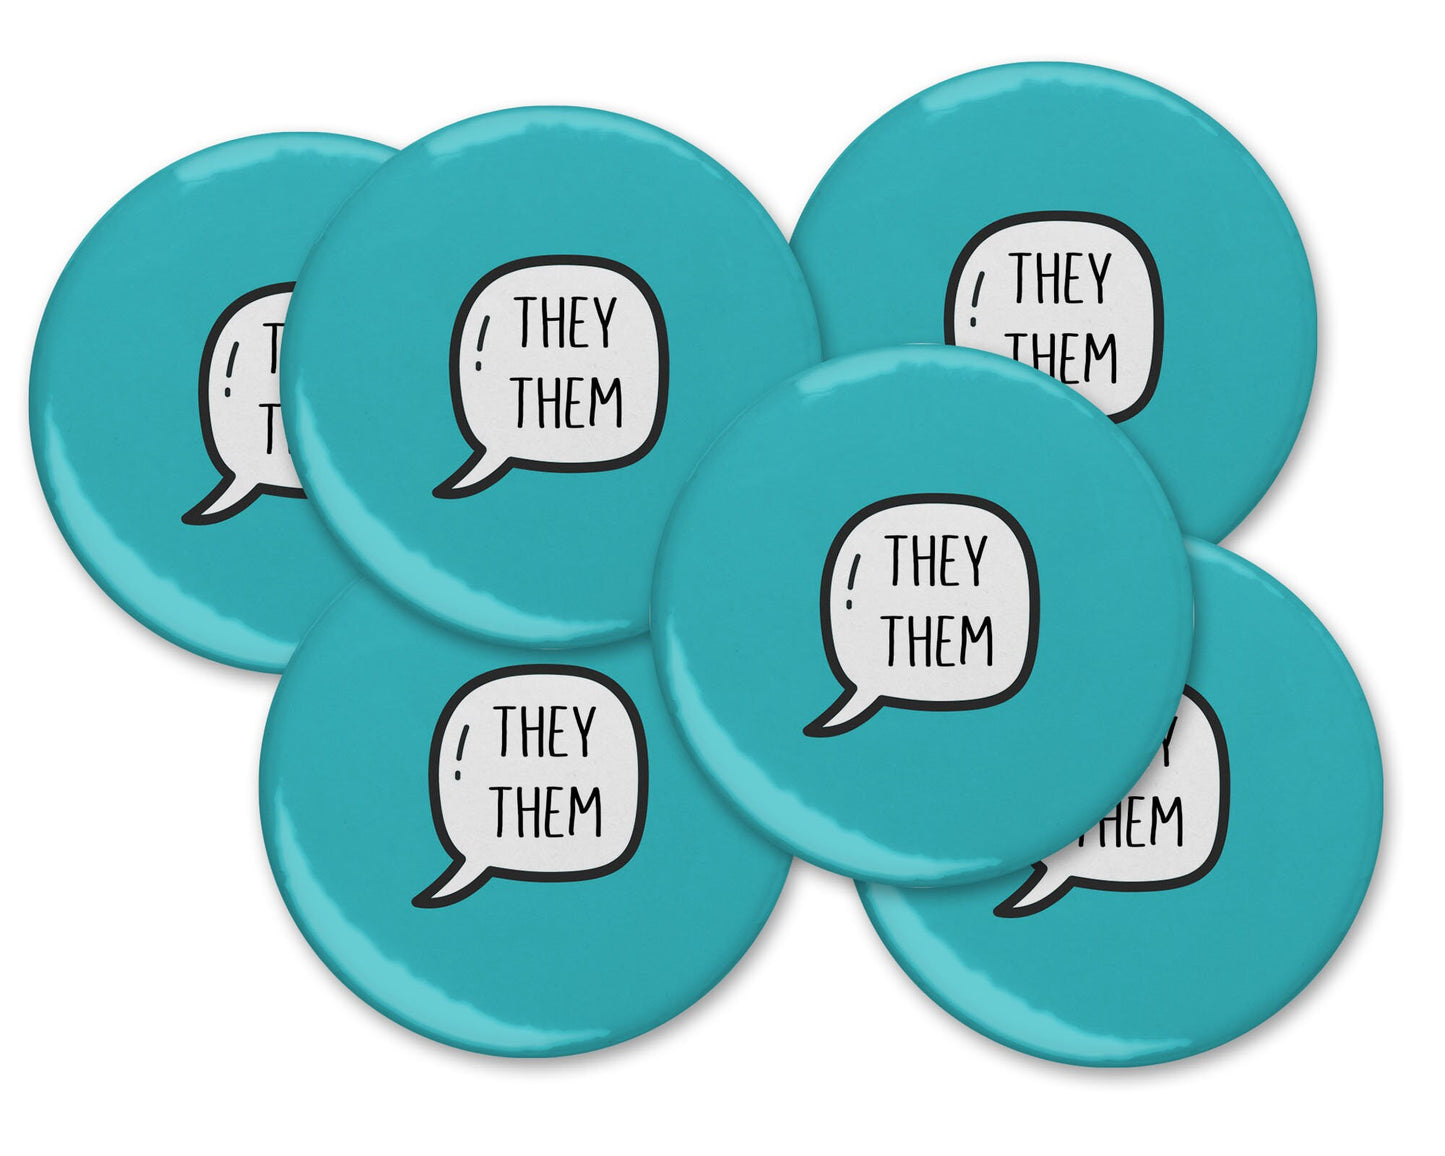 They/Them Button Pins, Prounon Button - 6 pcs+